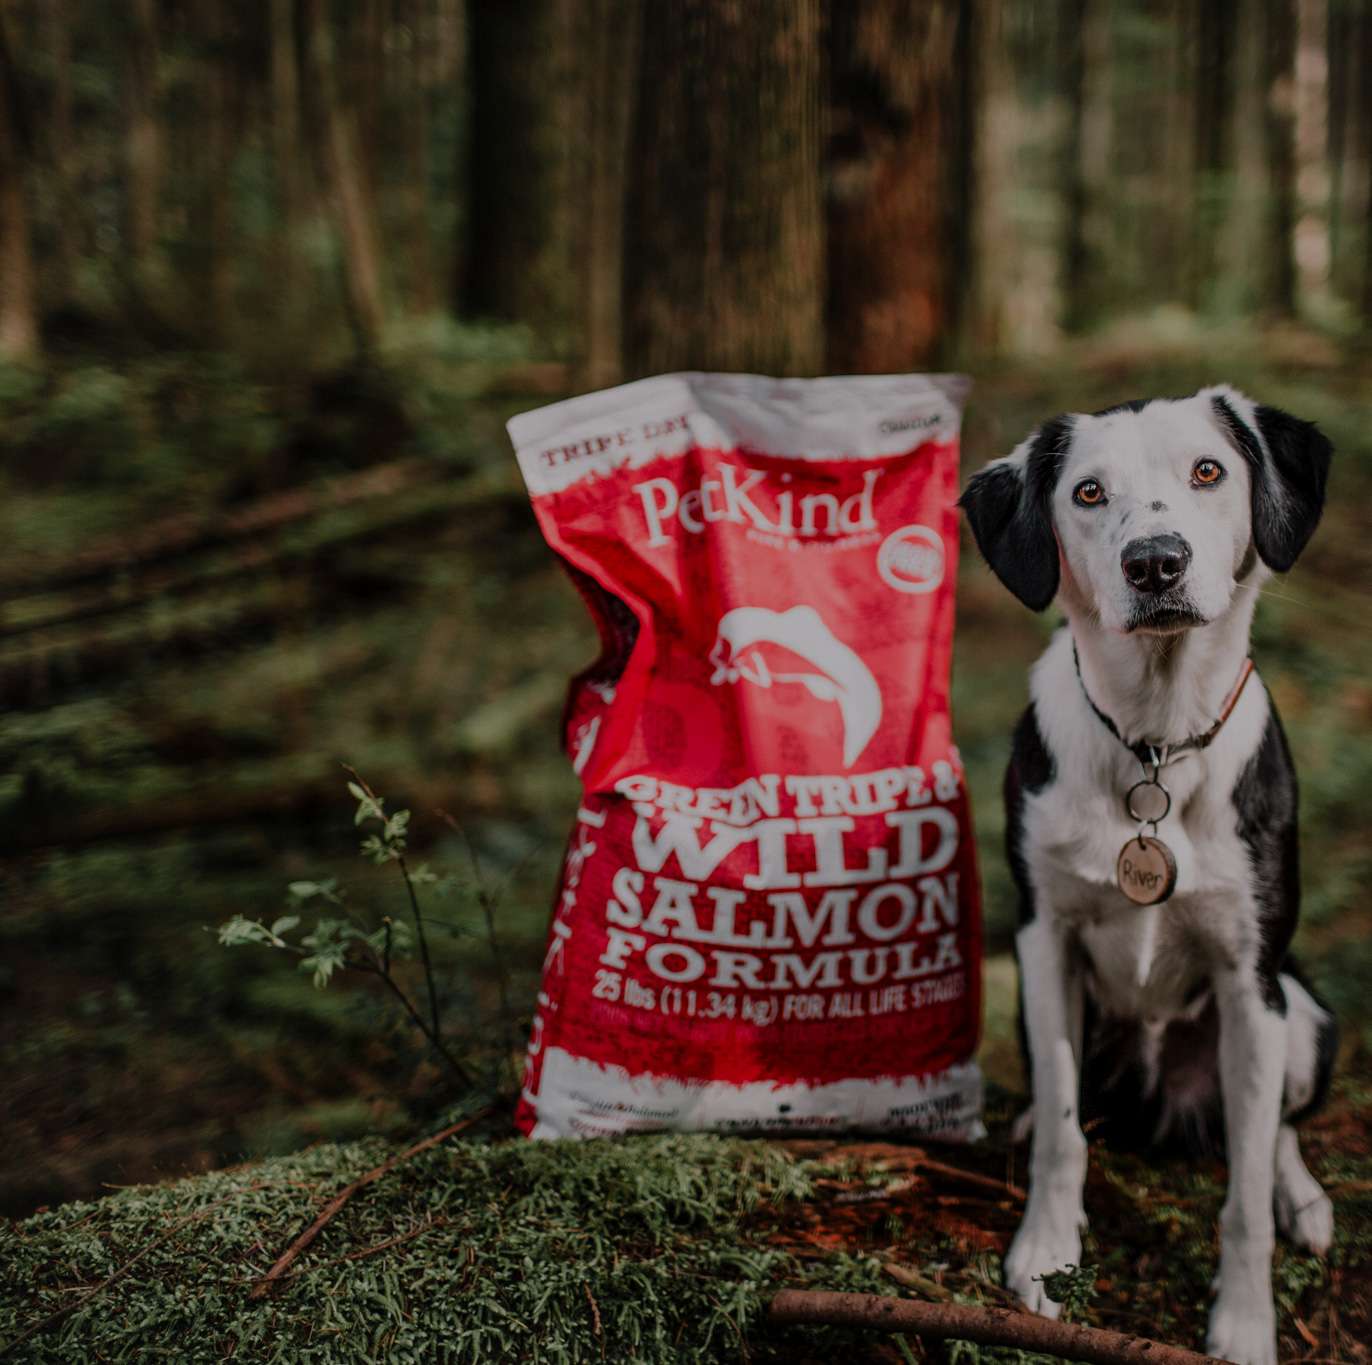 Border Collie and Labrador Retriever in a forest with PetKind Tripe Dry Green Tripe and Wild Salmon formula.